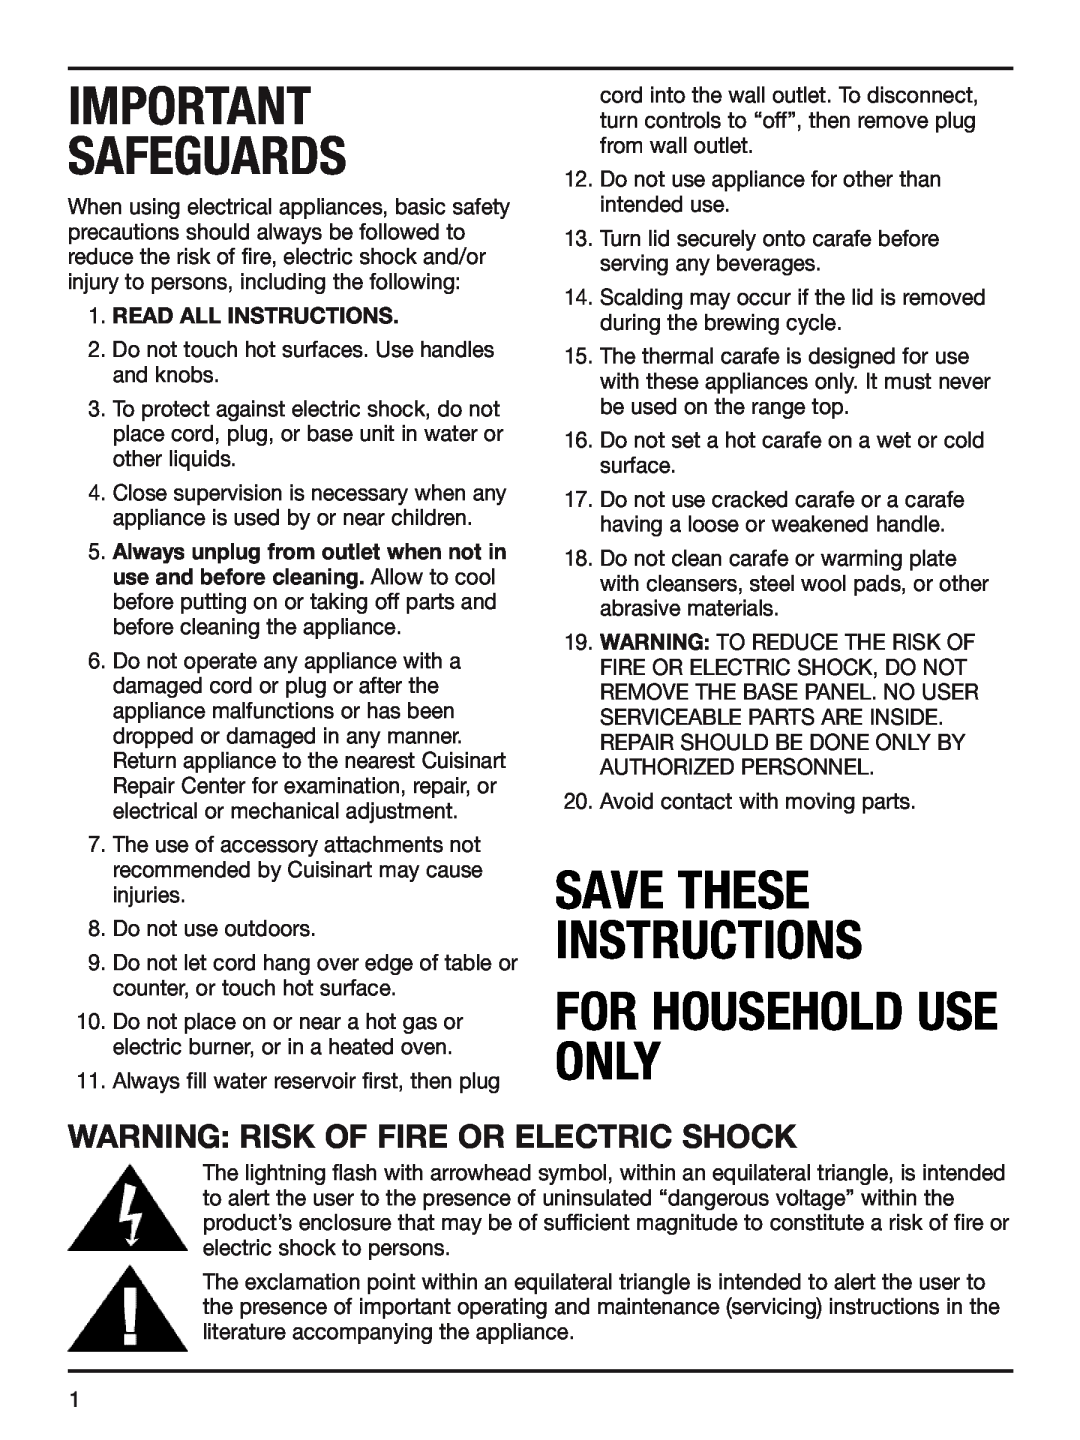 Cuisinart DCC-2400STR Safeguards, For Household Use Only, Save These Instructions, WARNING RISK Of FIRE OR ELECTRIC SHOCK 